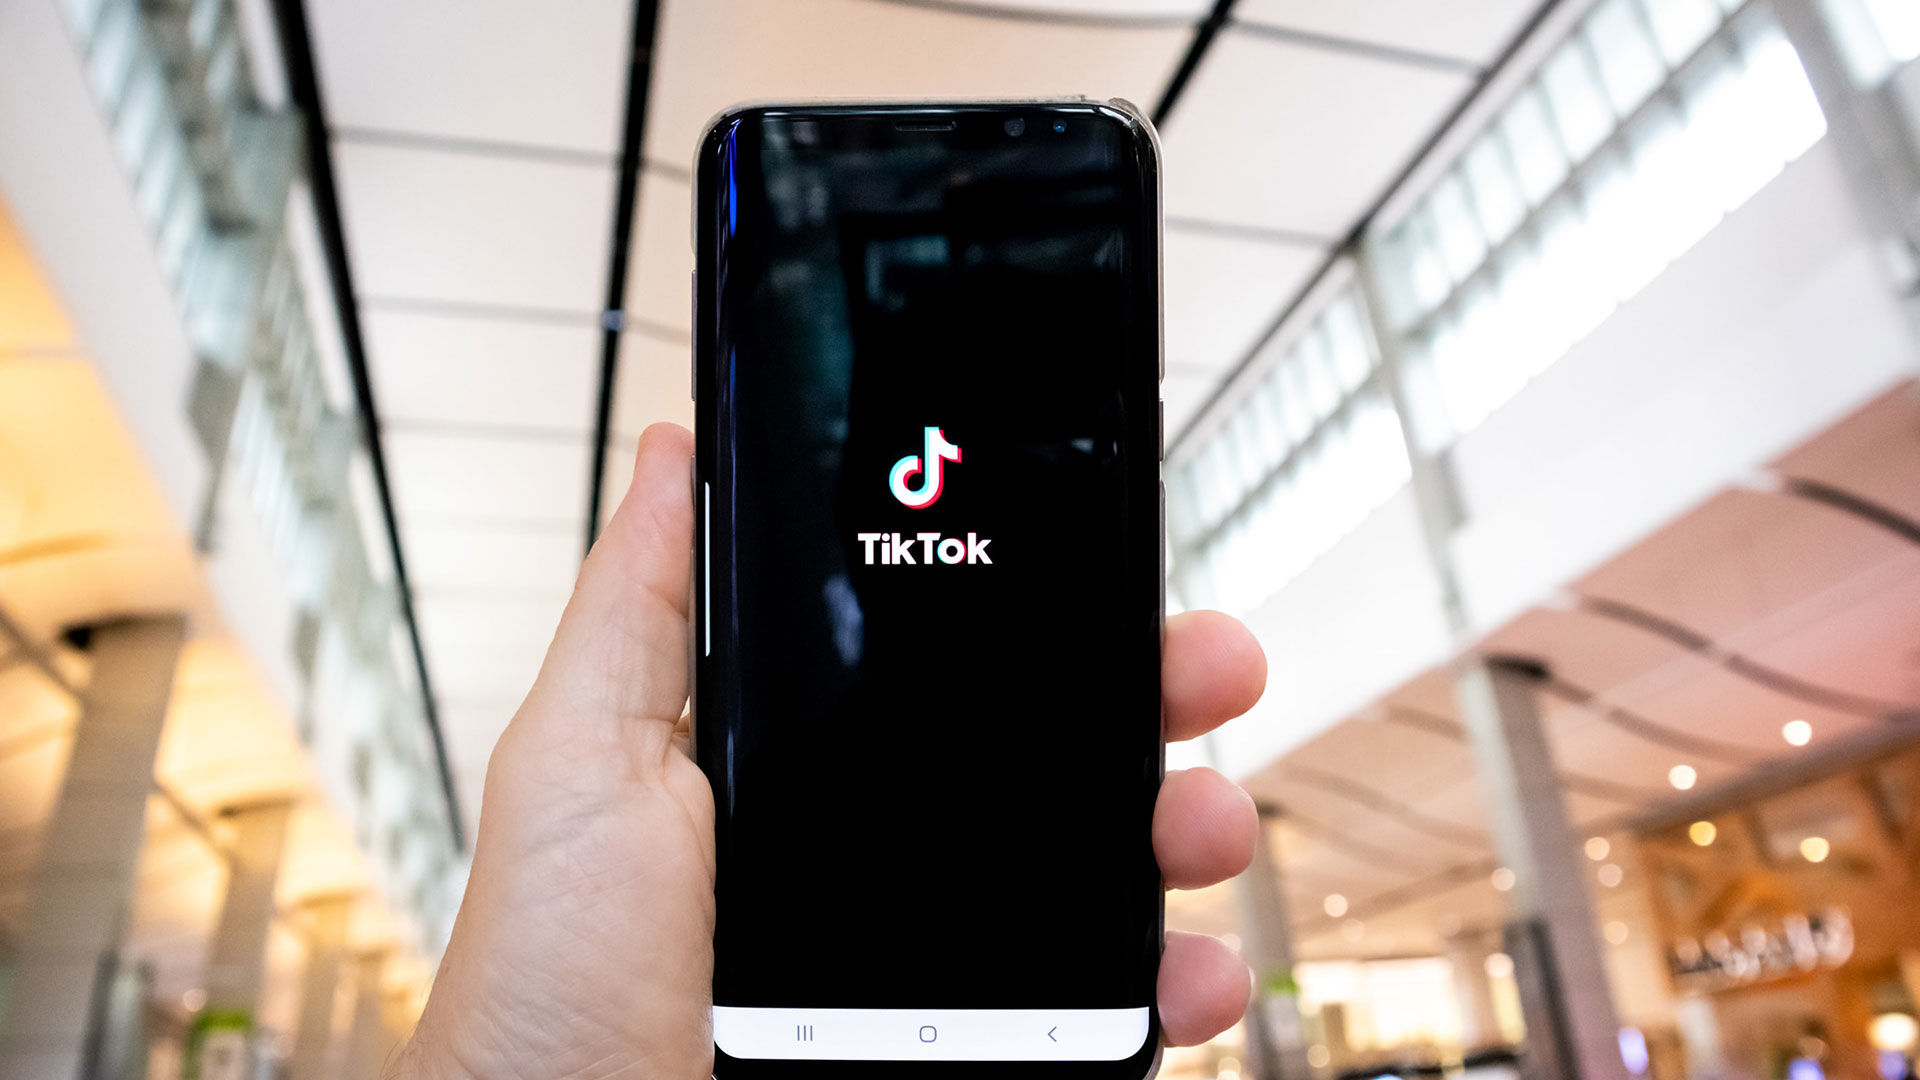 How to Contact TikTok Directly